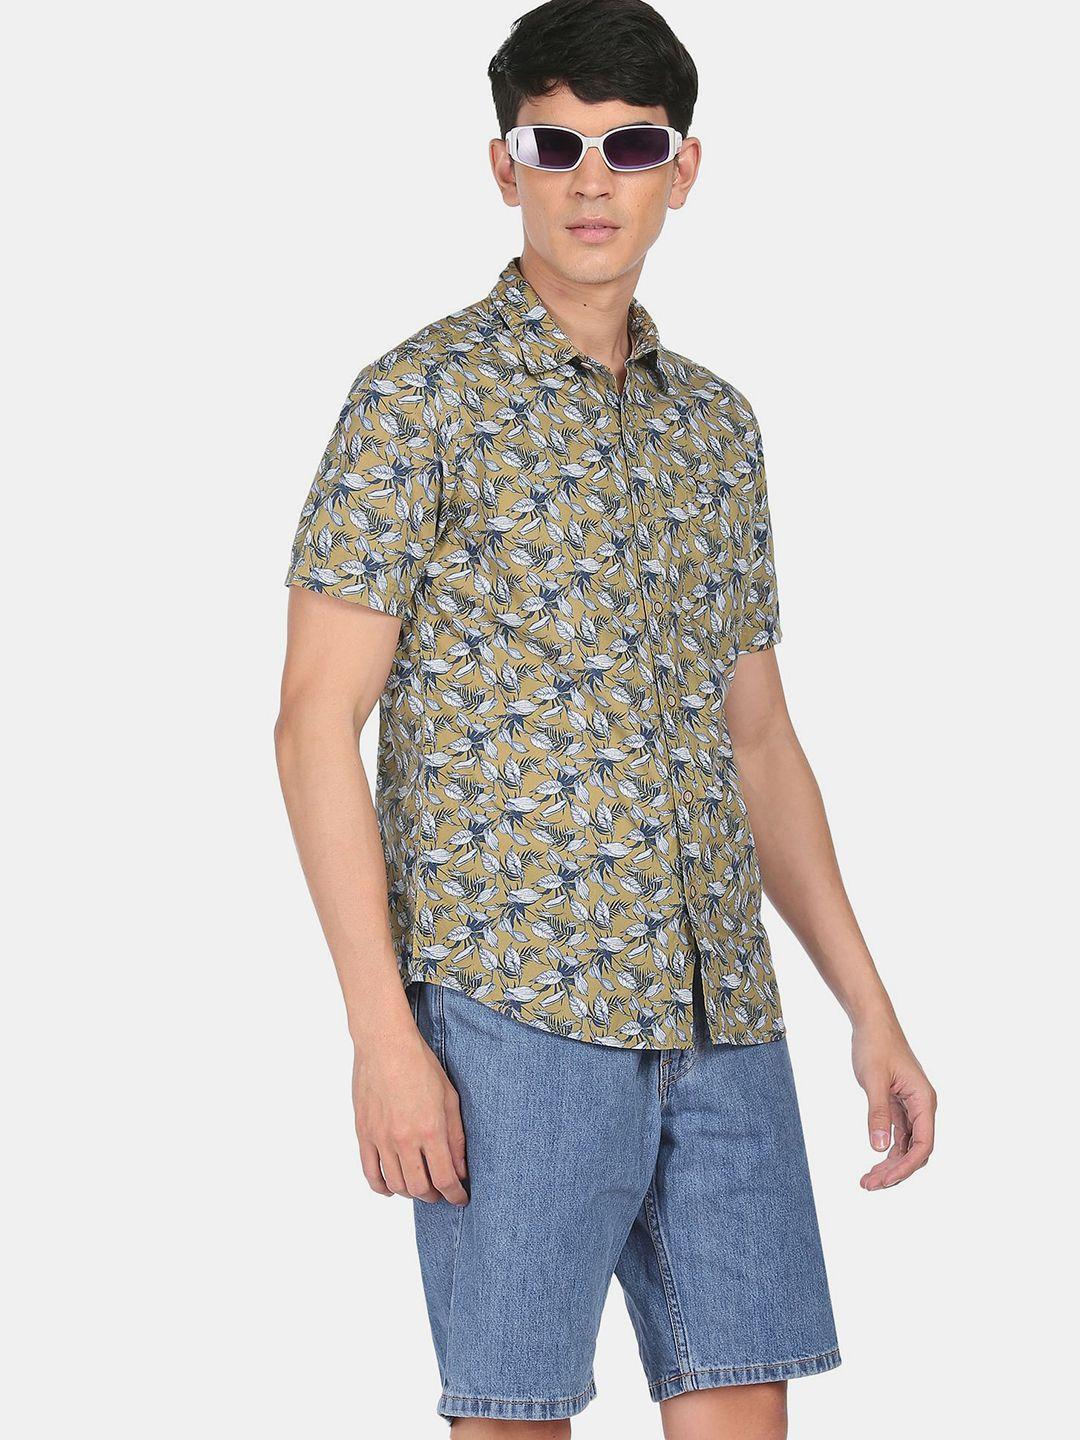 flying-machine-men-olive-green-&-blue-opaque-printed-pure-cotton-casual-shirt